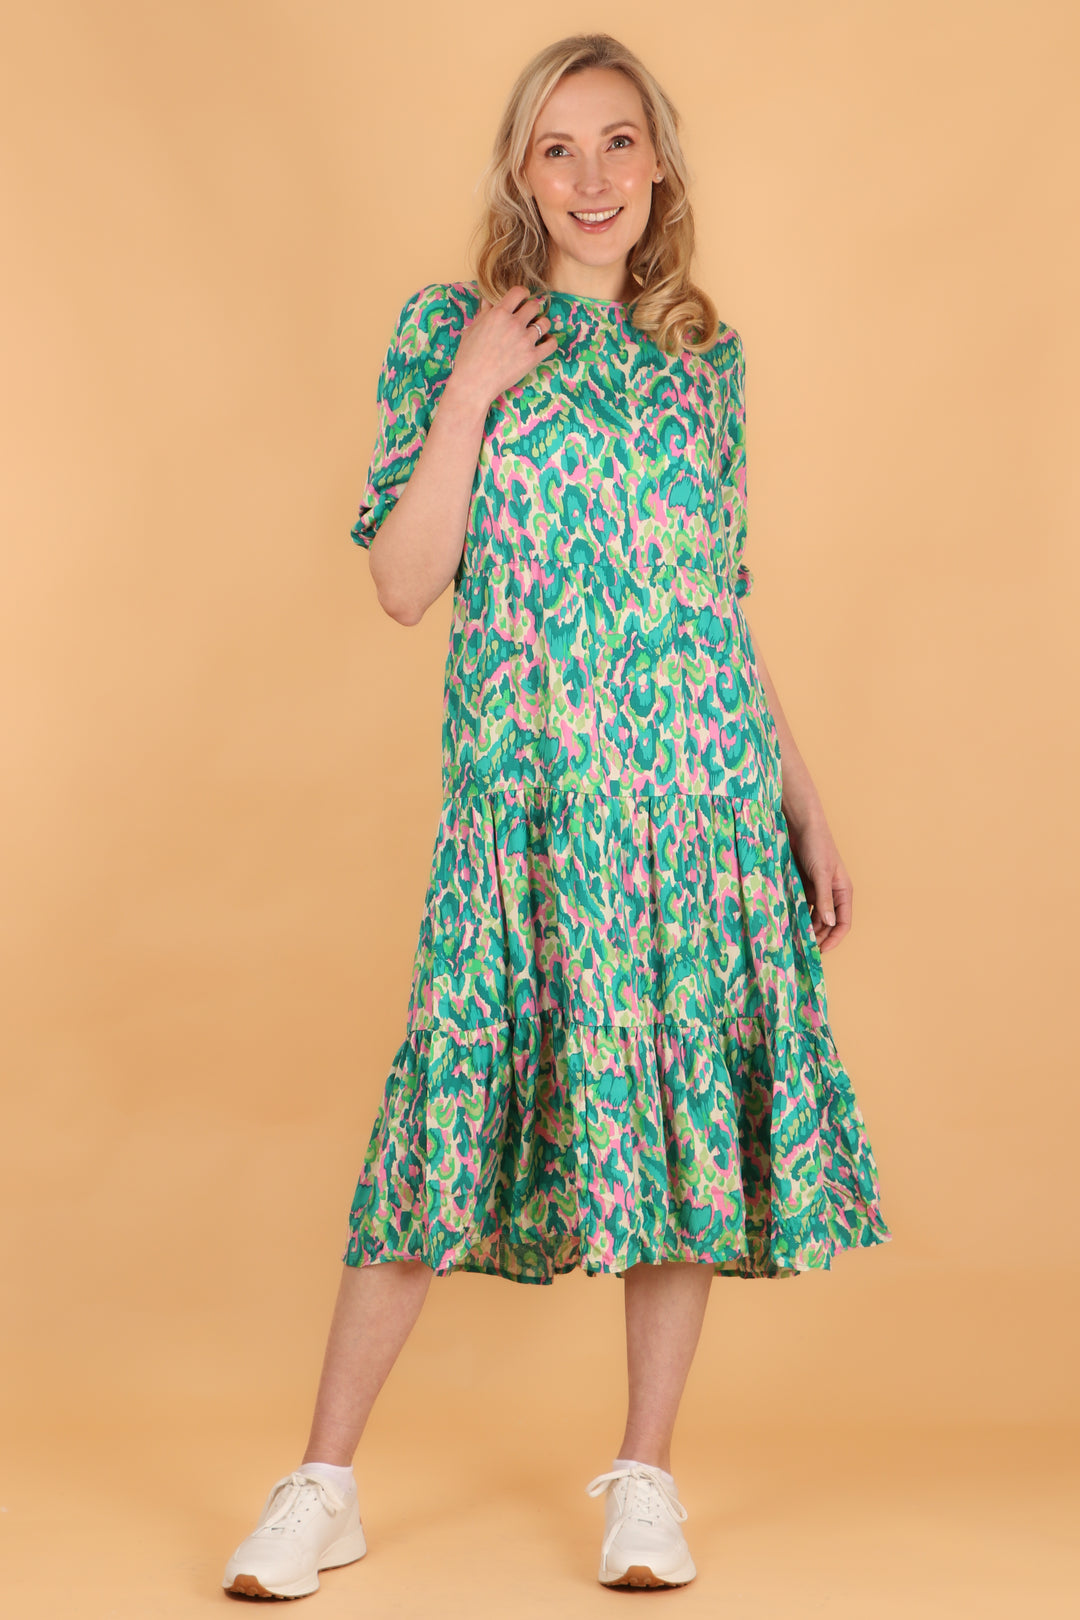 model wearing a midi length tiered dress with 3/4 sleeves with an all over green and pink abstract print pattern